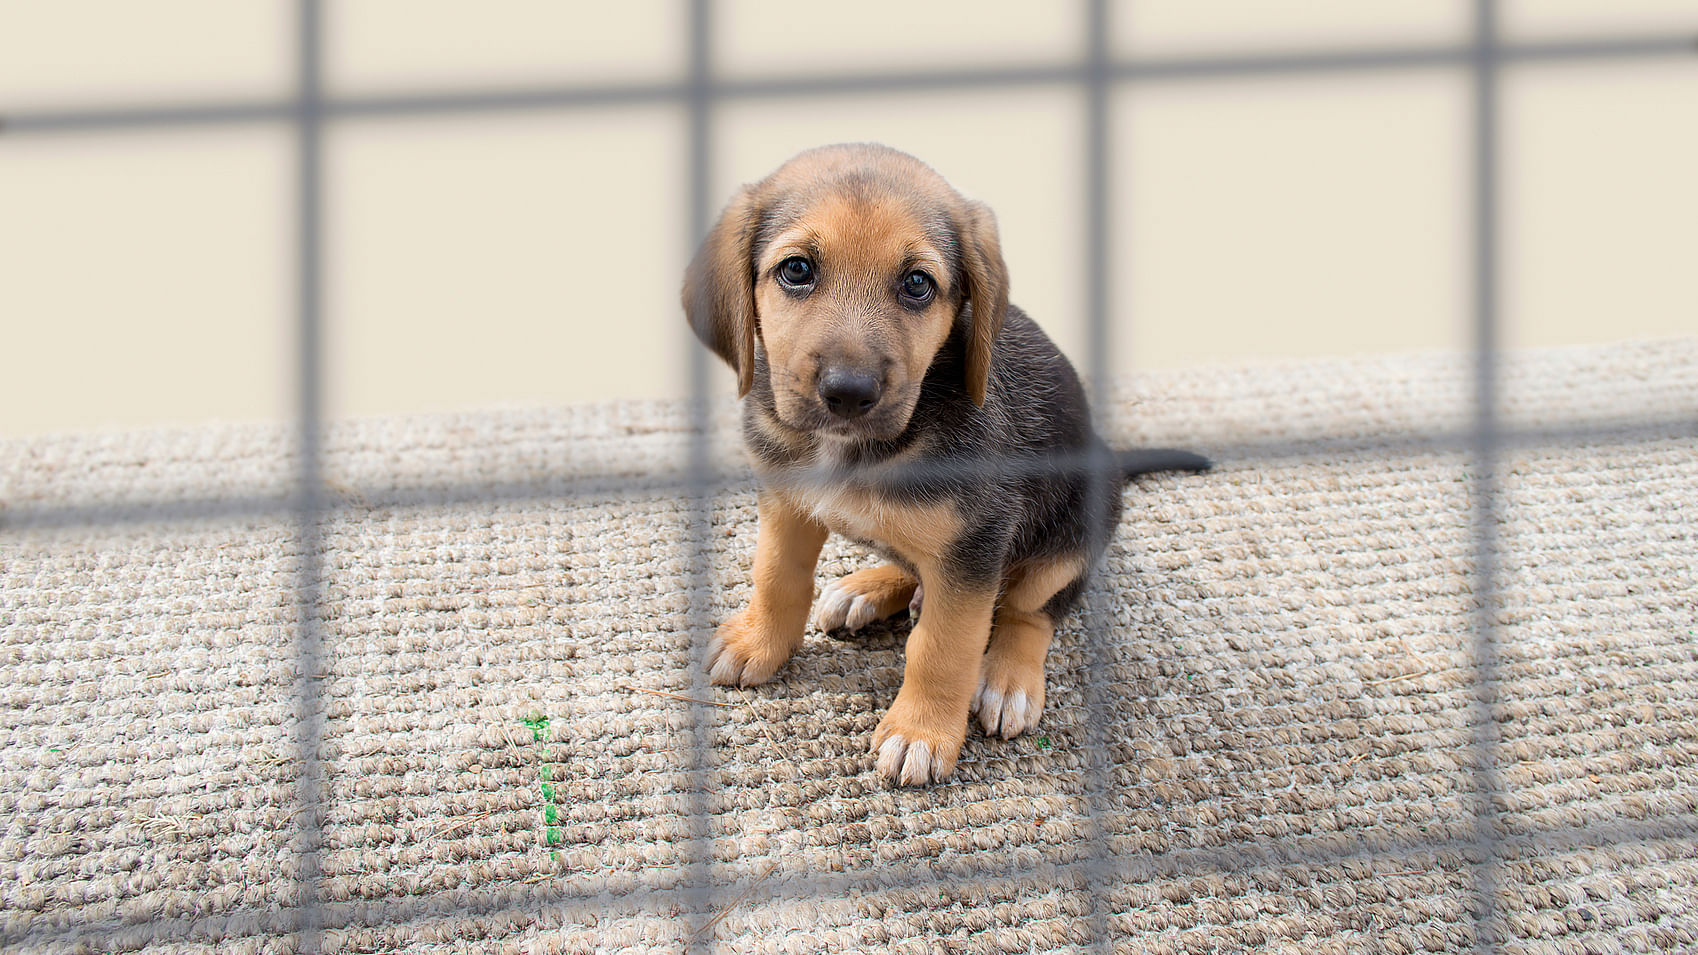 The puppies were tied up by a group of boys. Image used for representation. (Photo: iStockphoto)